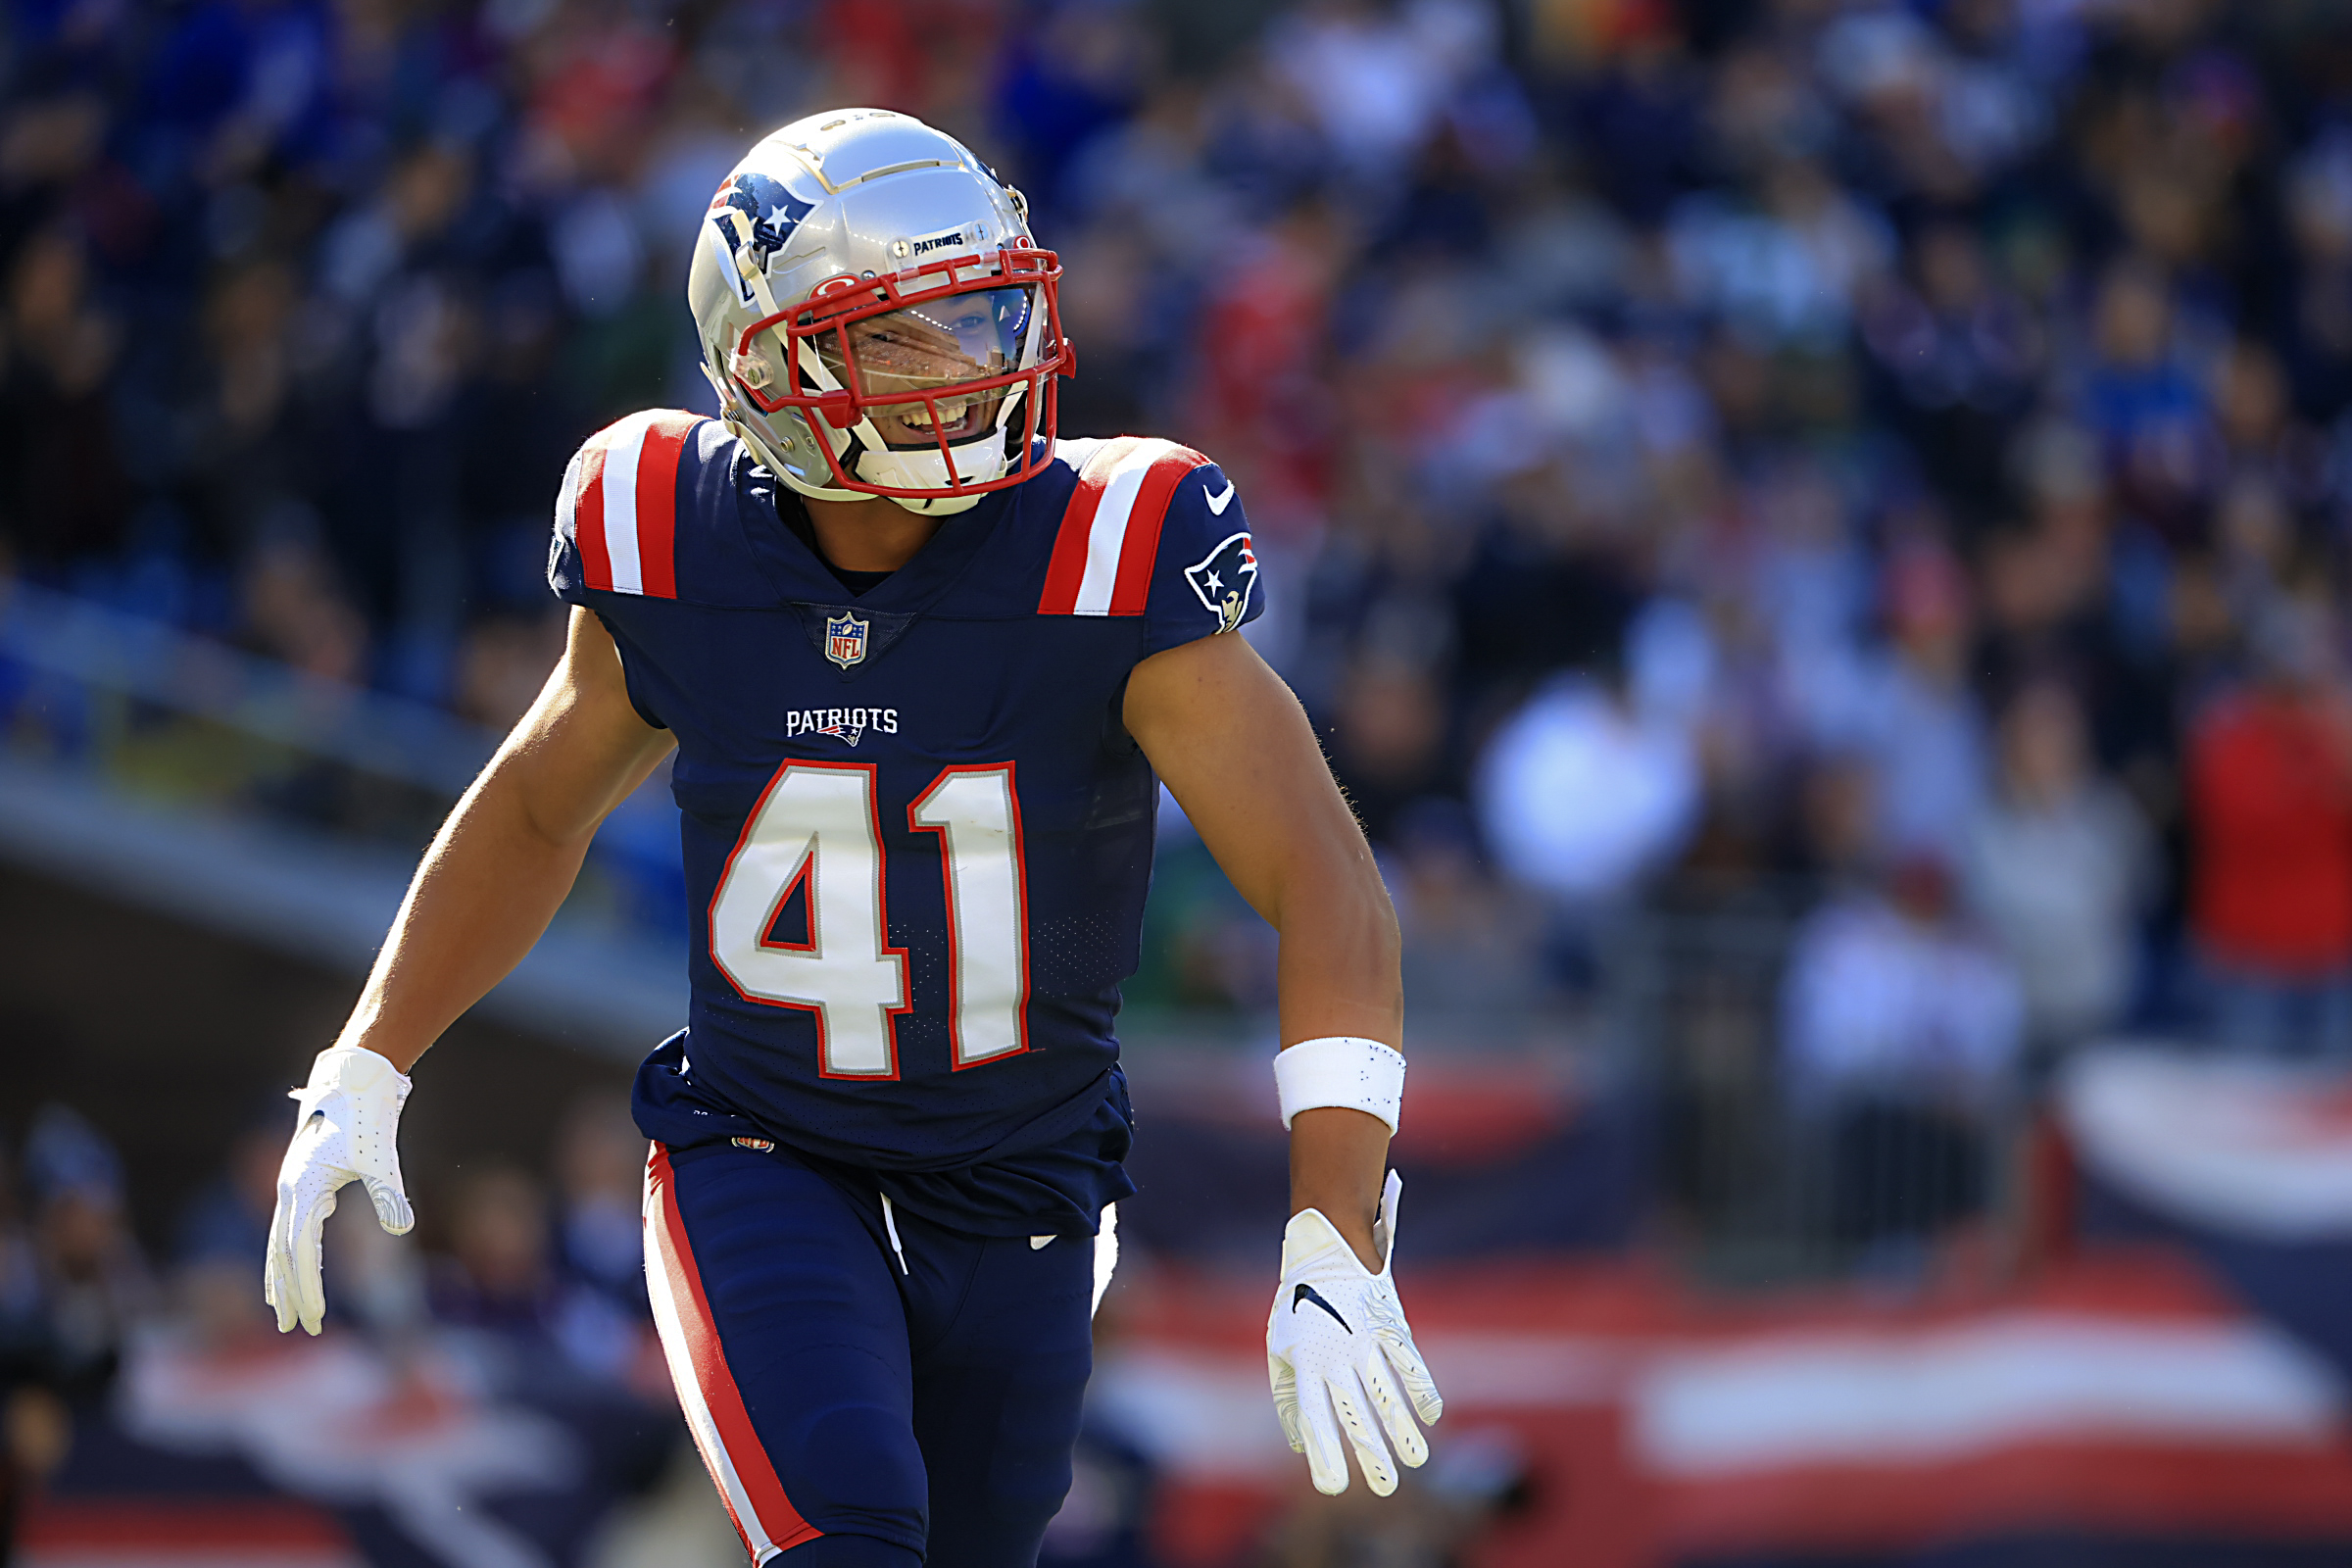 Defensive back Myles Bryant is the Patriots' latest success story